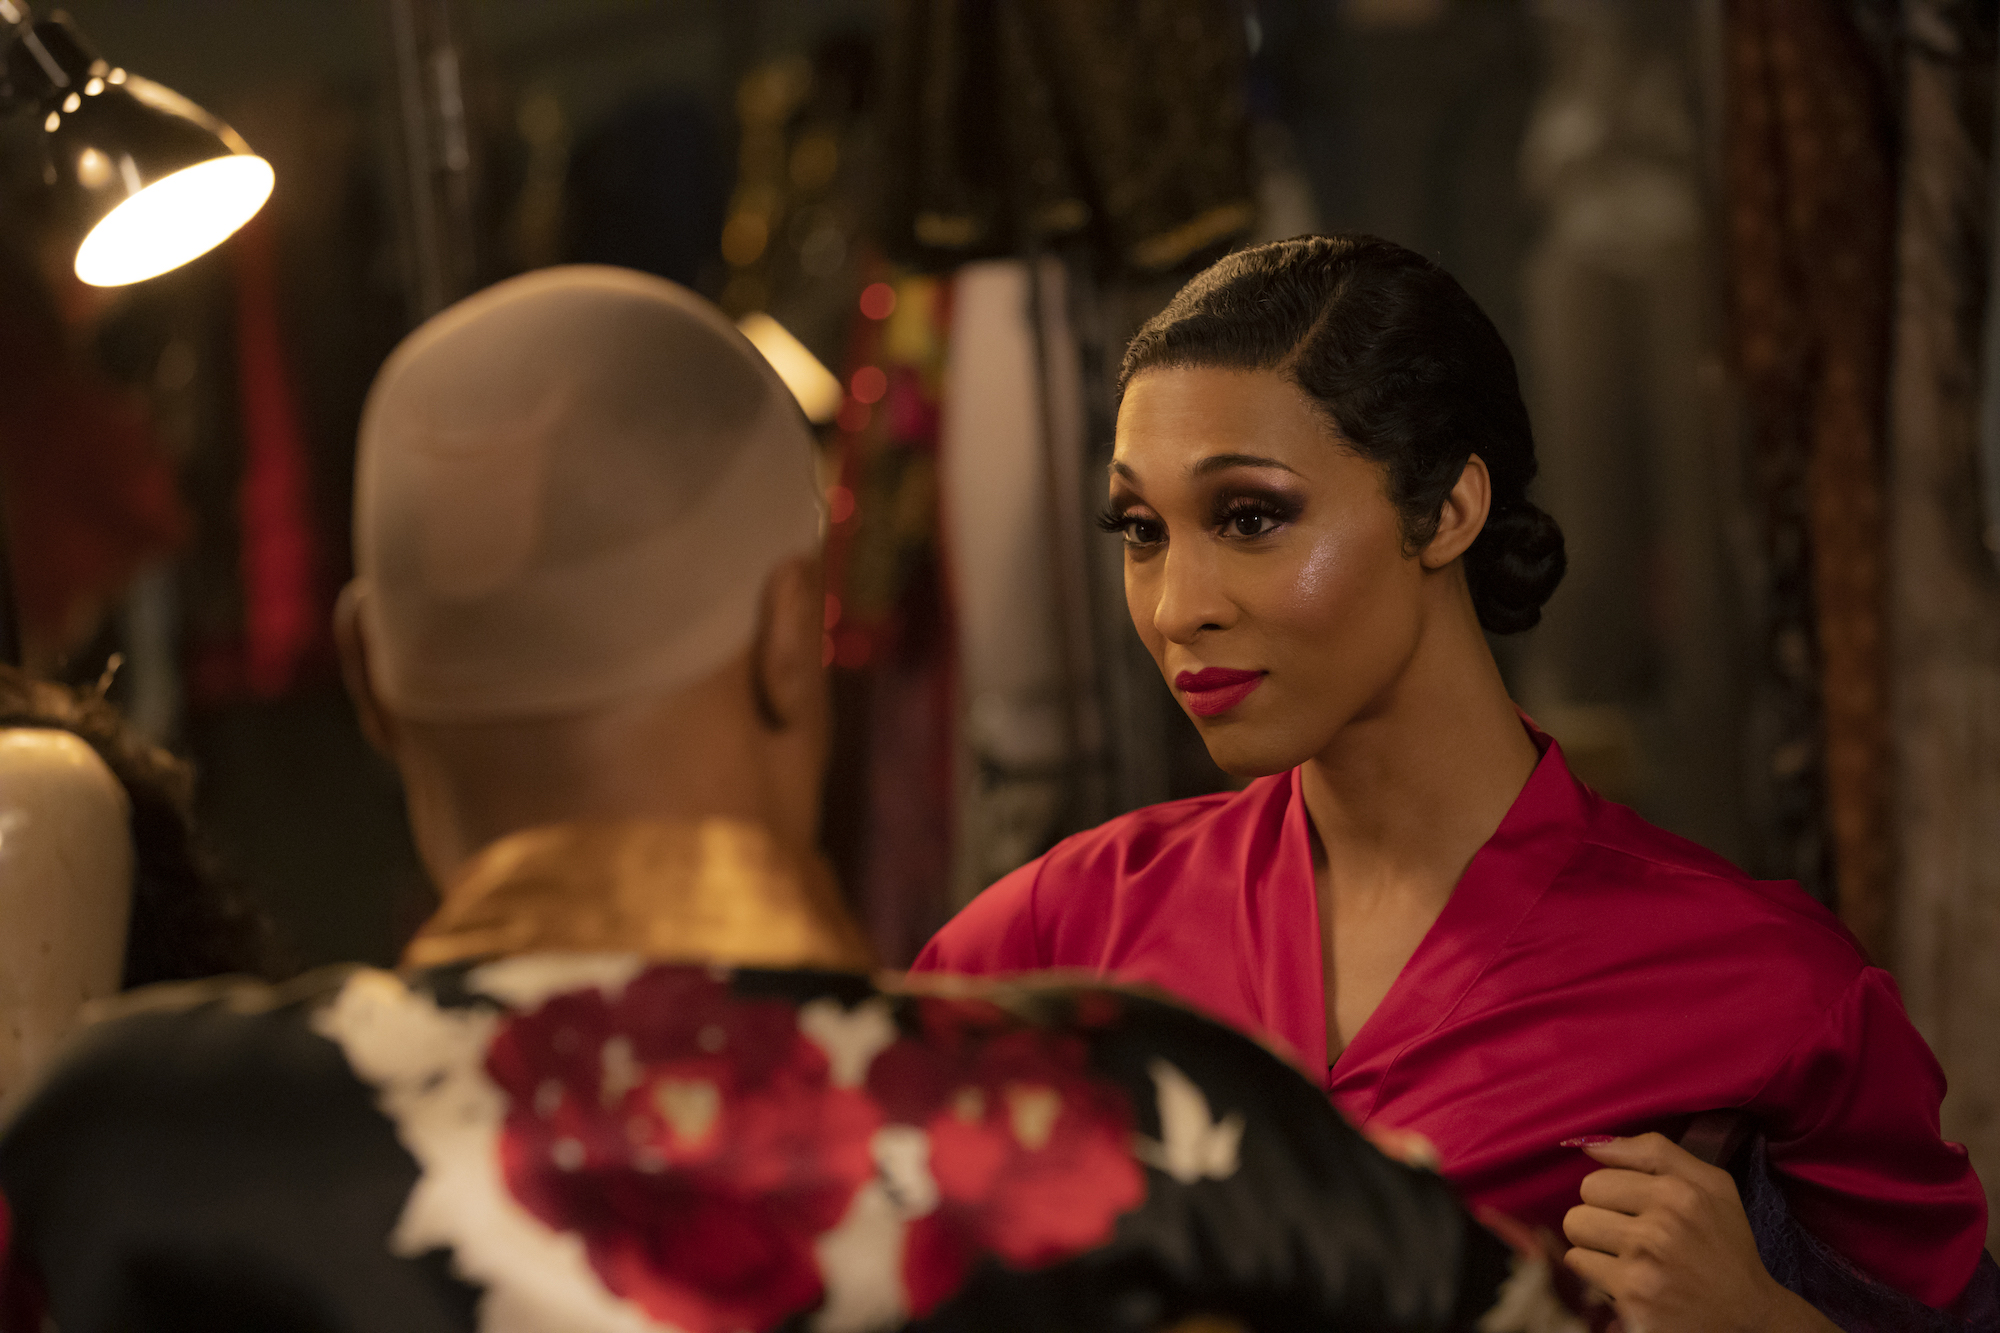 Mj Rodriguez and Billy Porter applying makeup in 'Pose.'